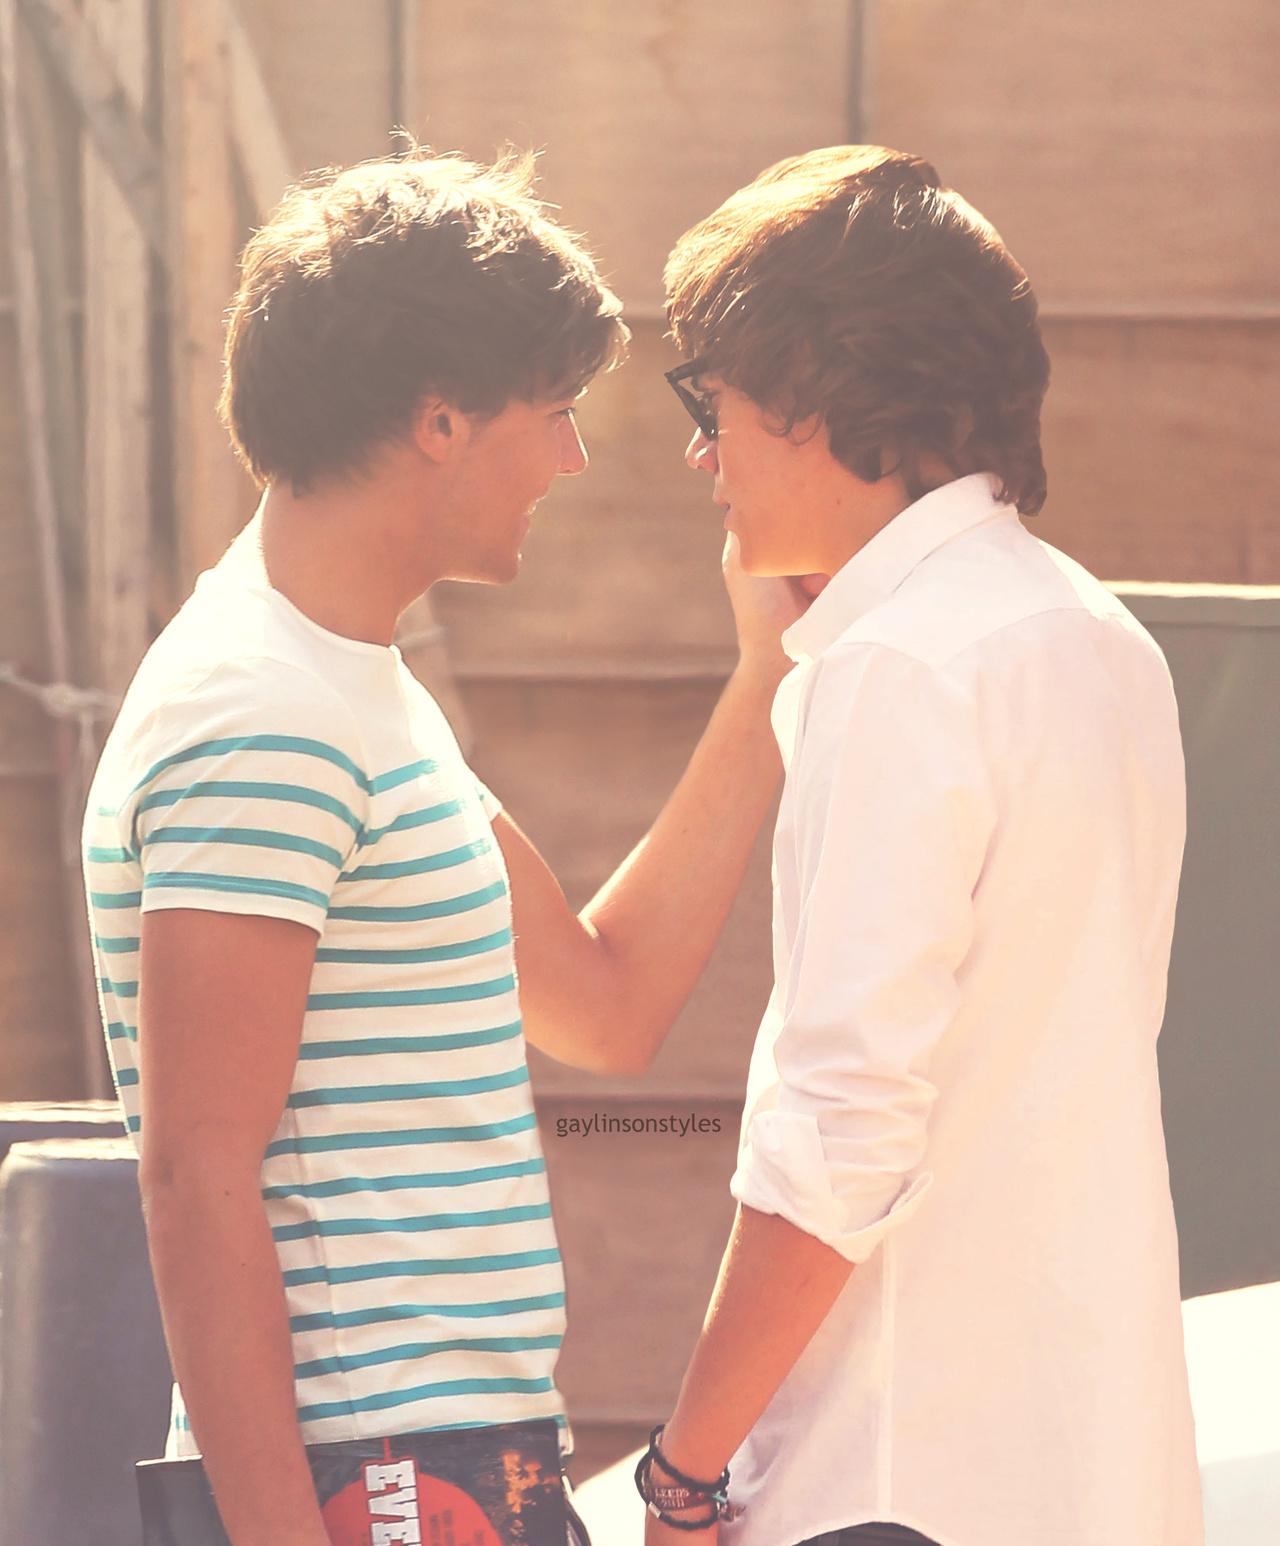 Larry Stylinson image HD wallpaper and background photo